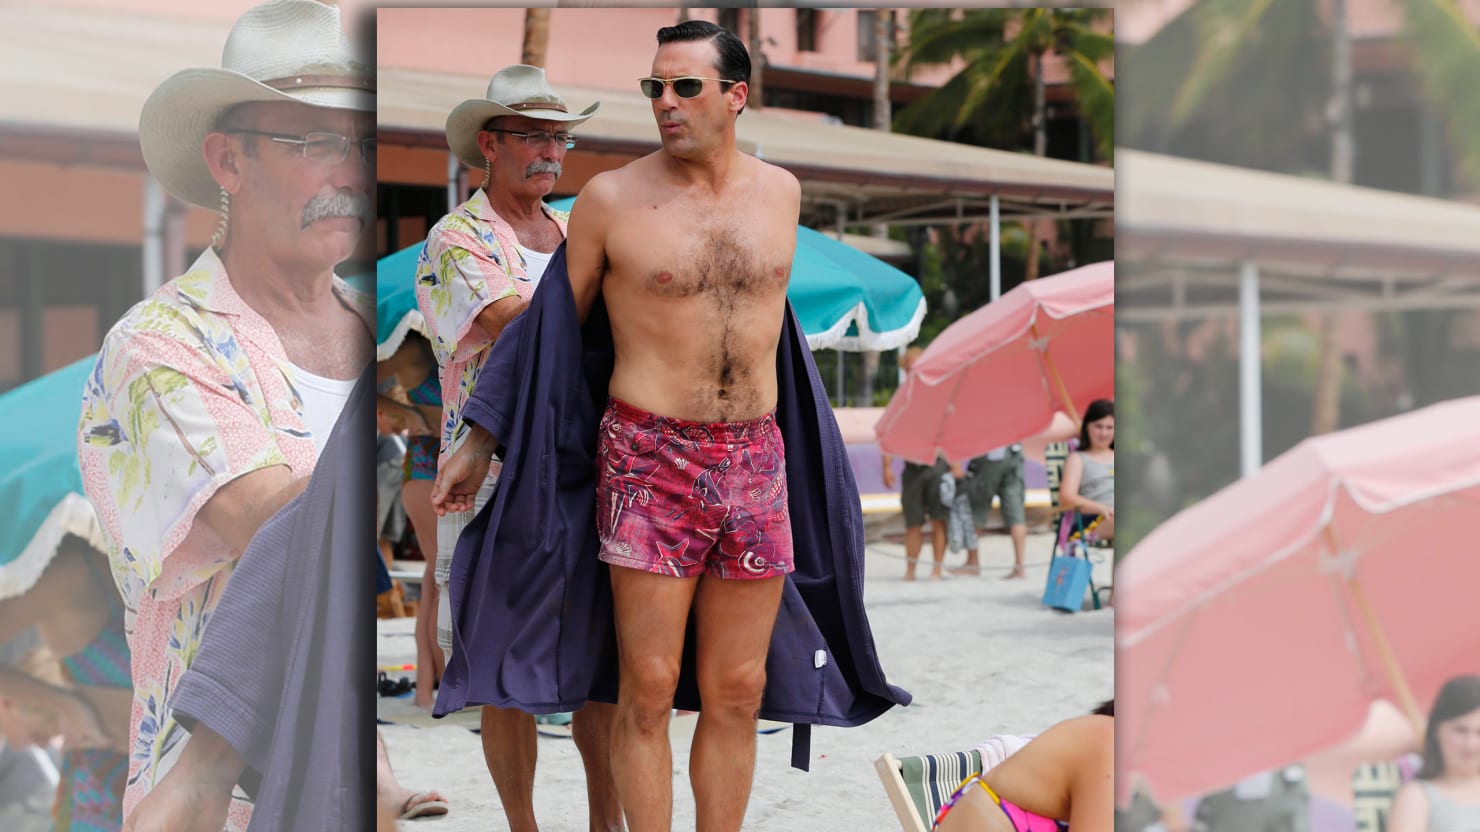 Mad Men': Jon Hamm’s Penis is Too Big for Clothes, Needs Airbrushing.